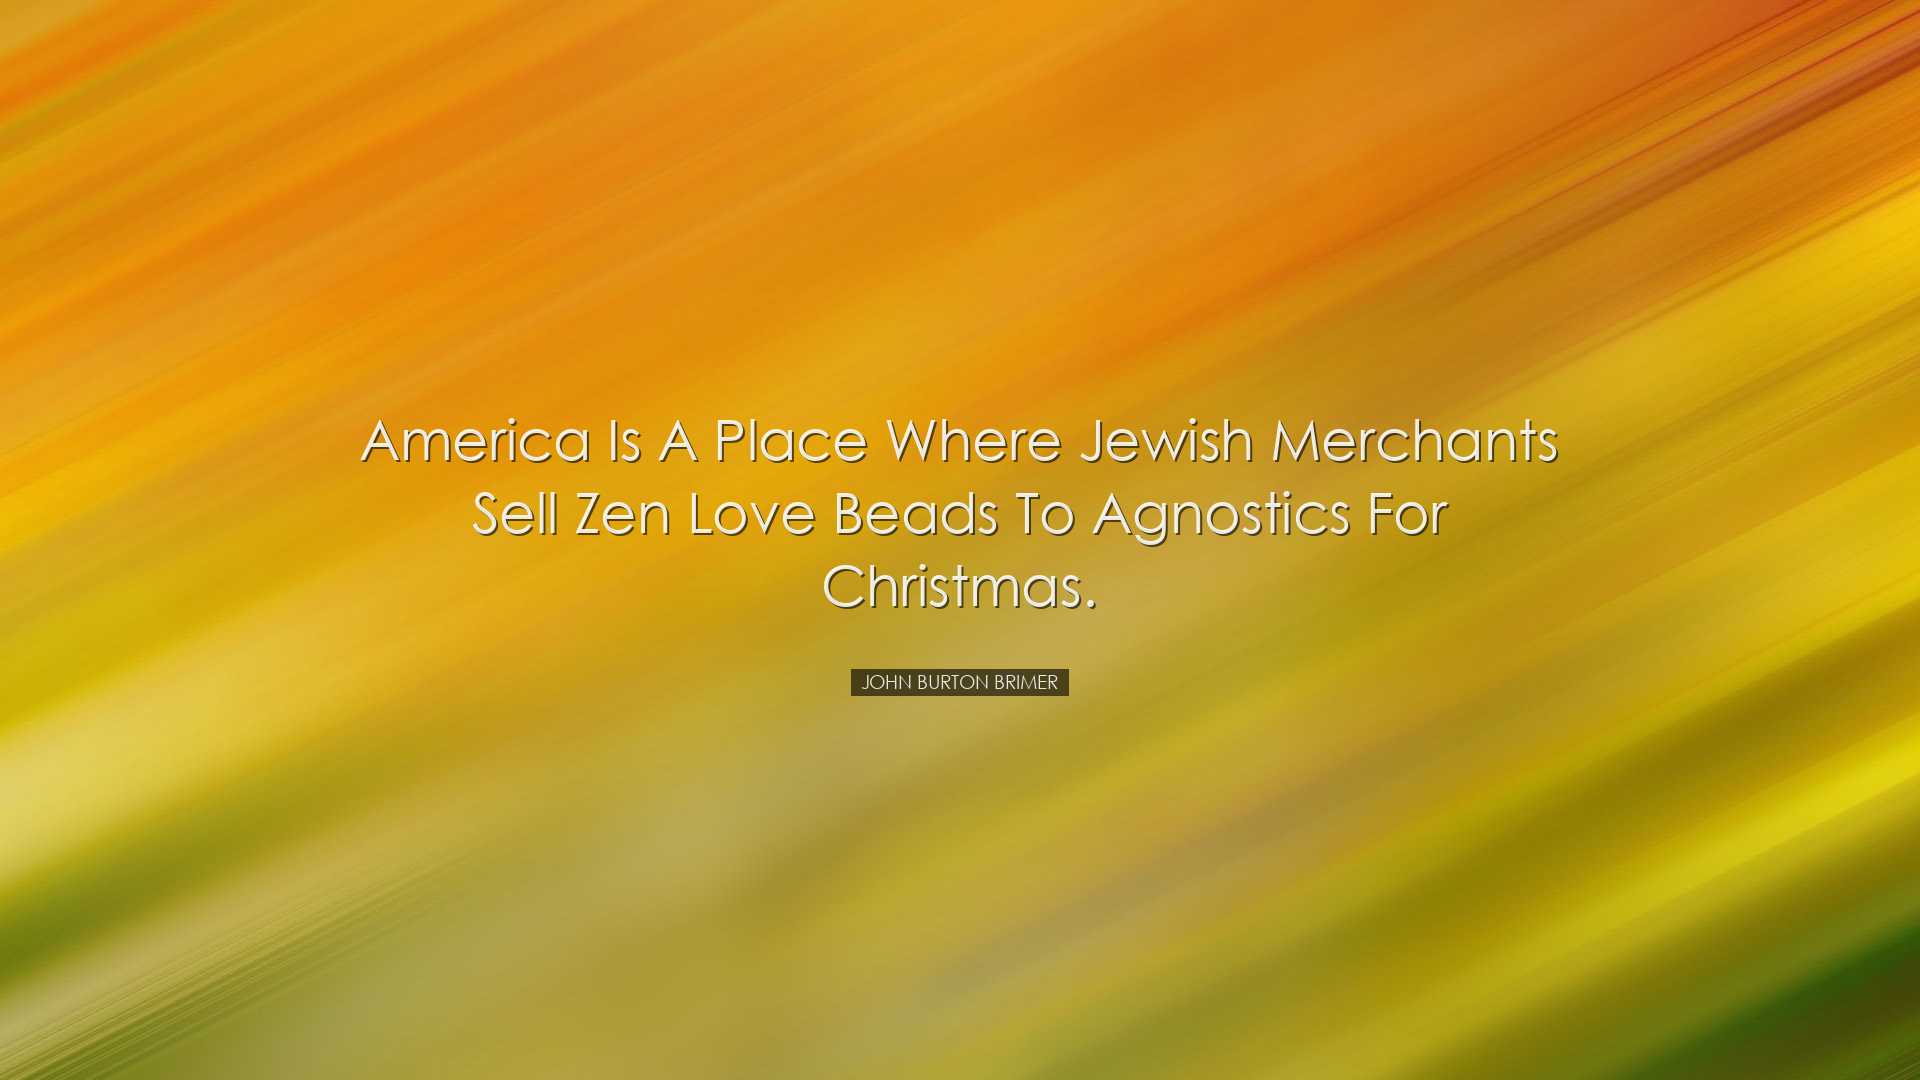 America is a place where Jewish merchants sell Zen love beads to a